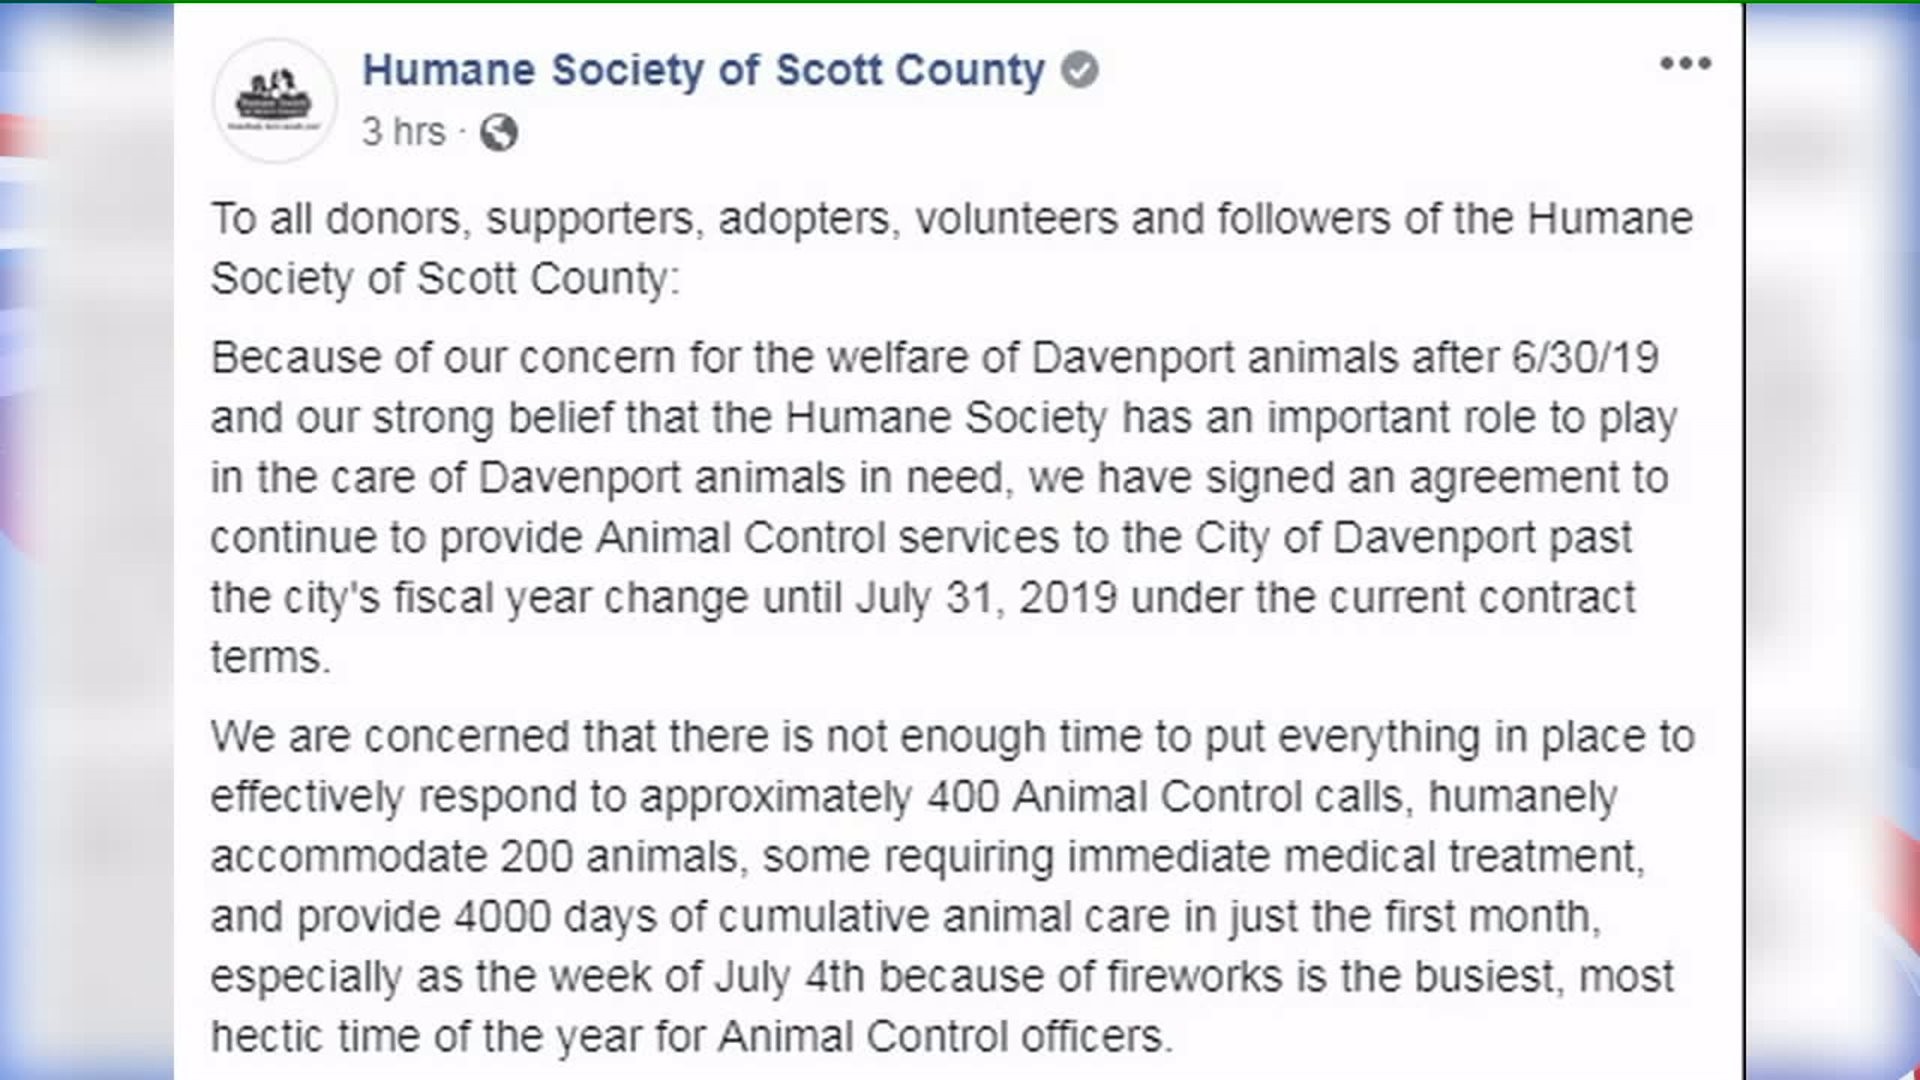 Humane Society of Scott County agrees to continue providing animal control services to Davenport, temporarily